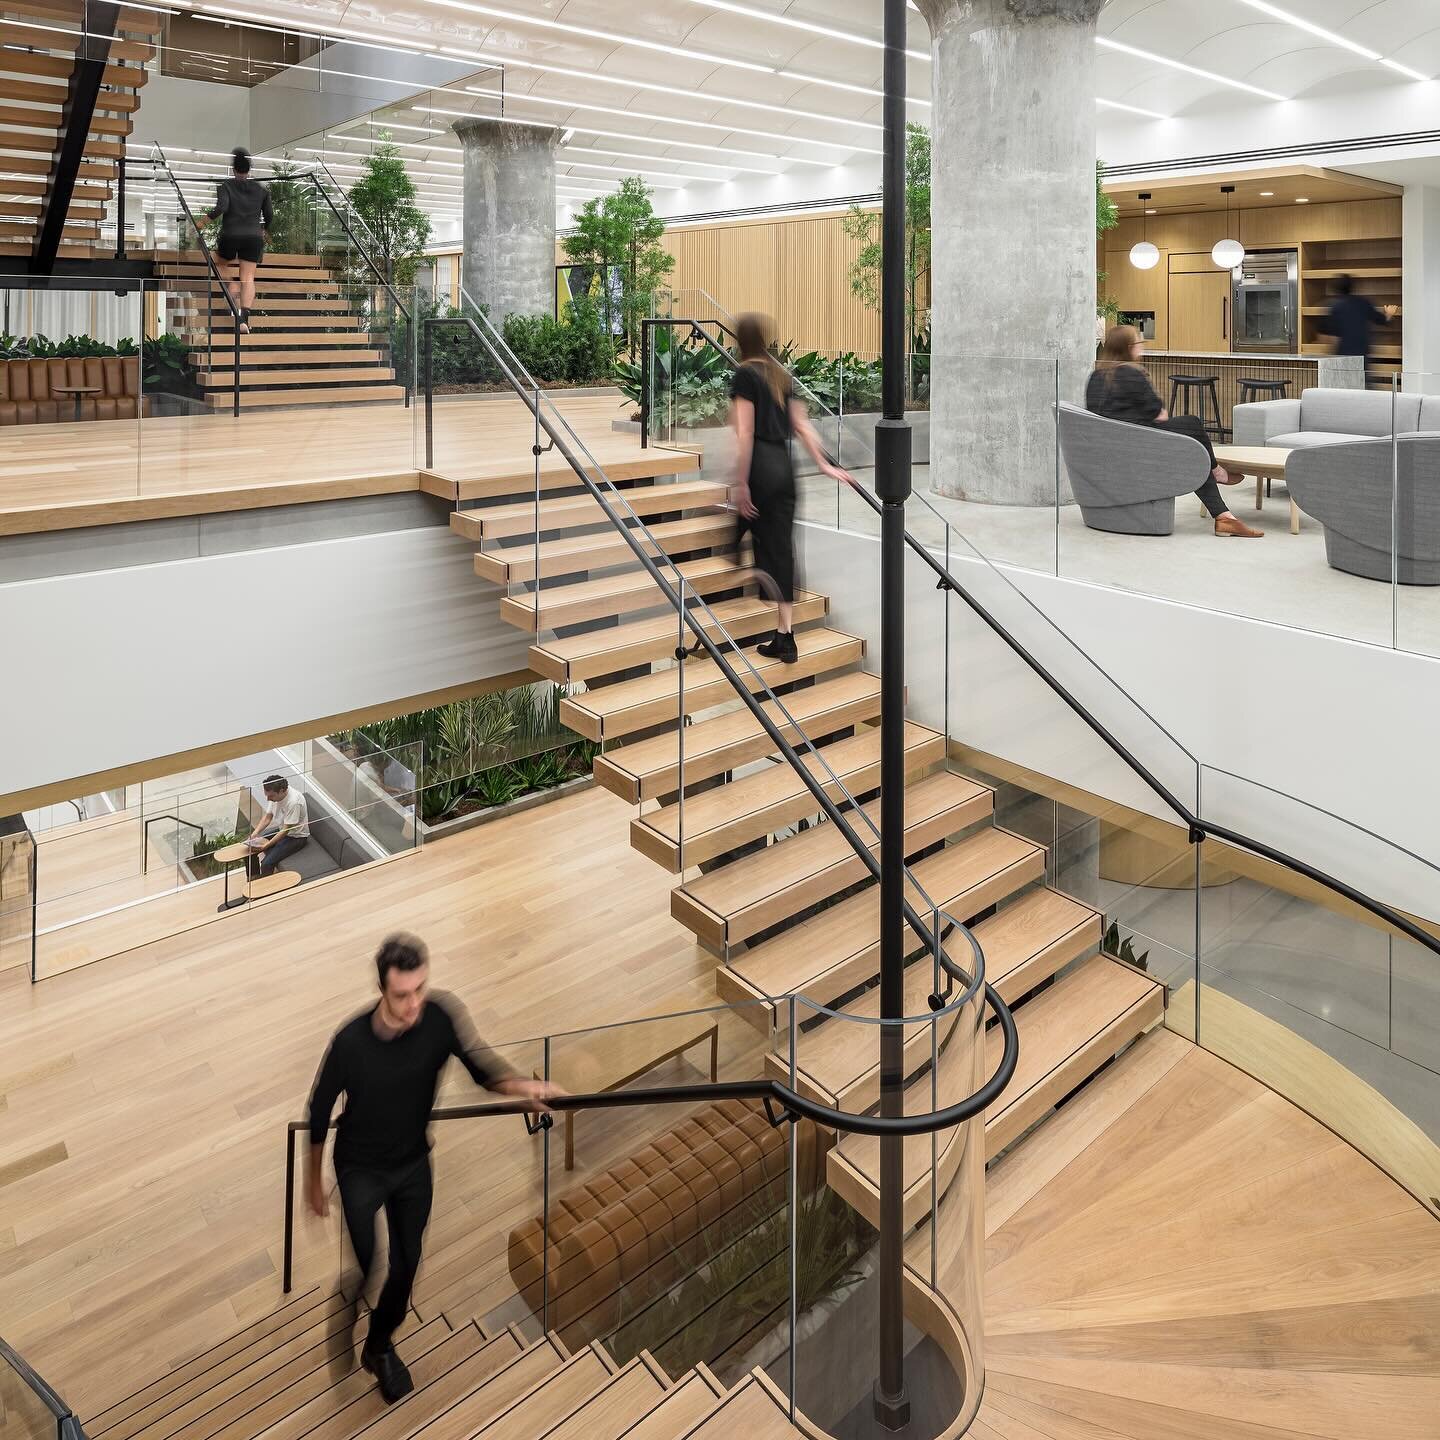 At Peloton&rsquo;s Headquarters, social spaces, once confined to the top floor, were intentionally extended across eight floors, providing equal support and access for everyone. The newly vertically linked spaces orbit around an open atrium and conti